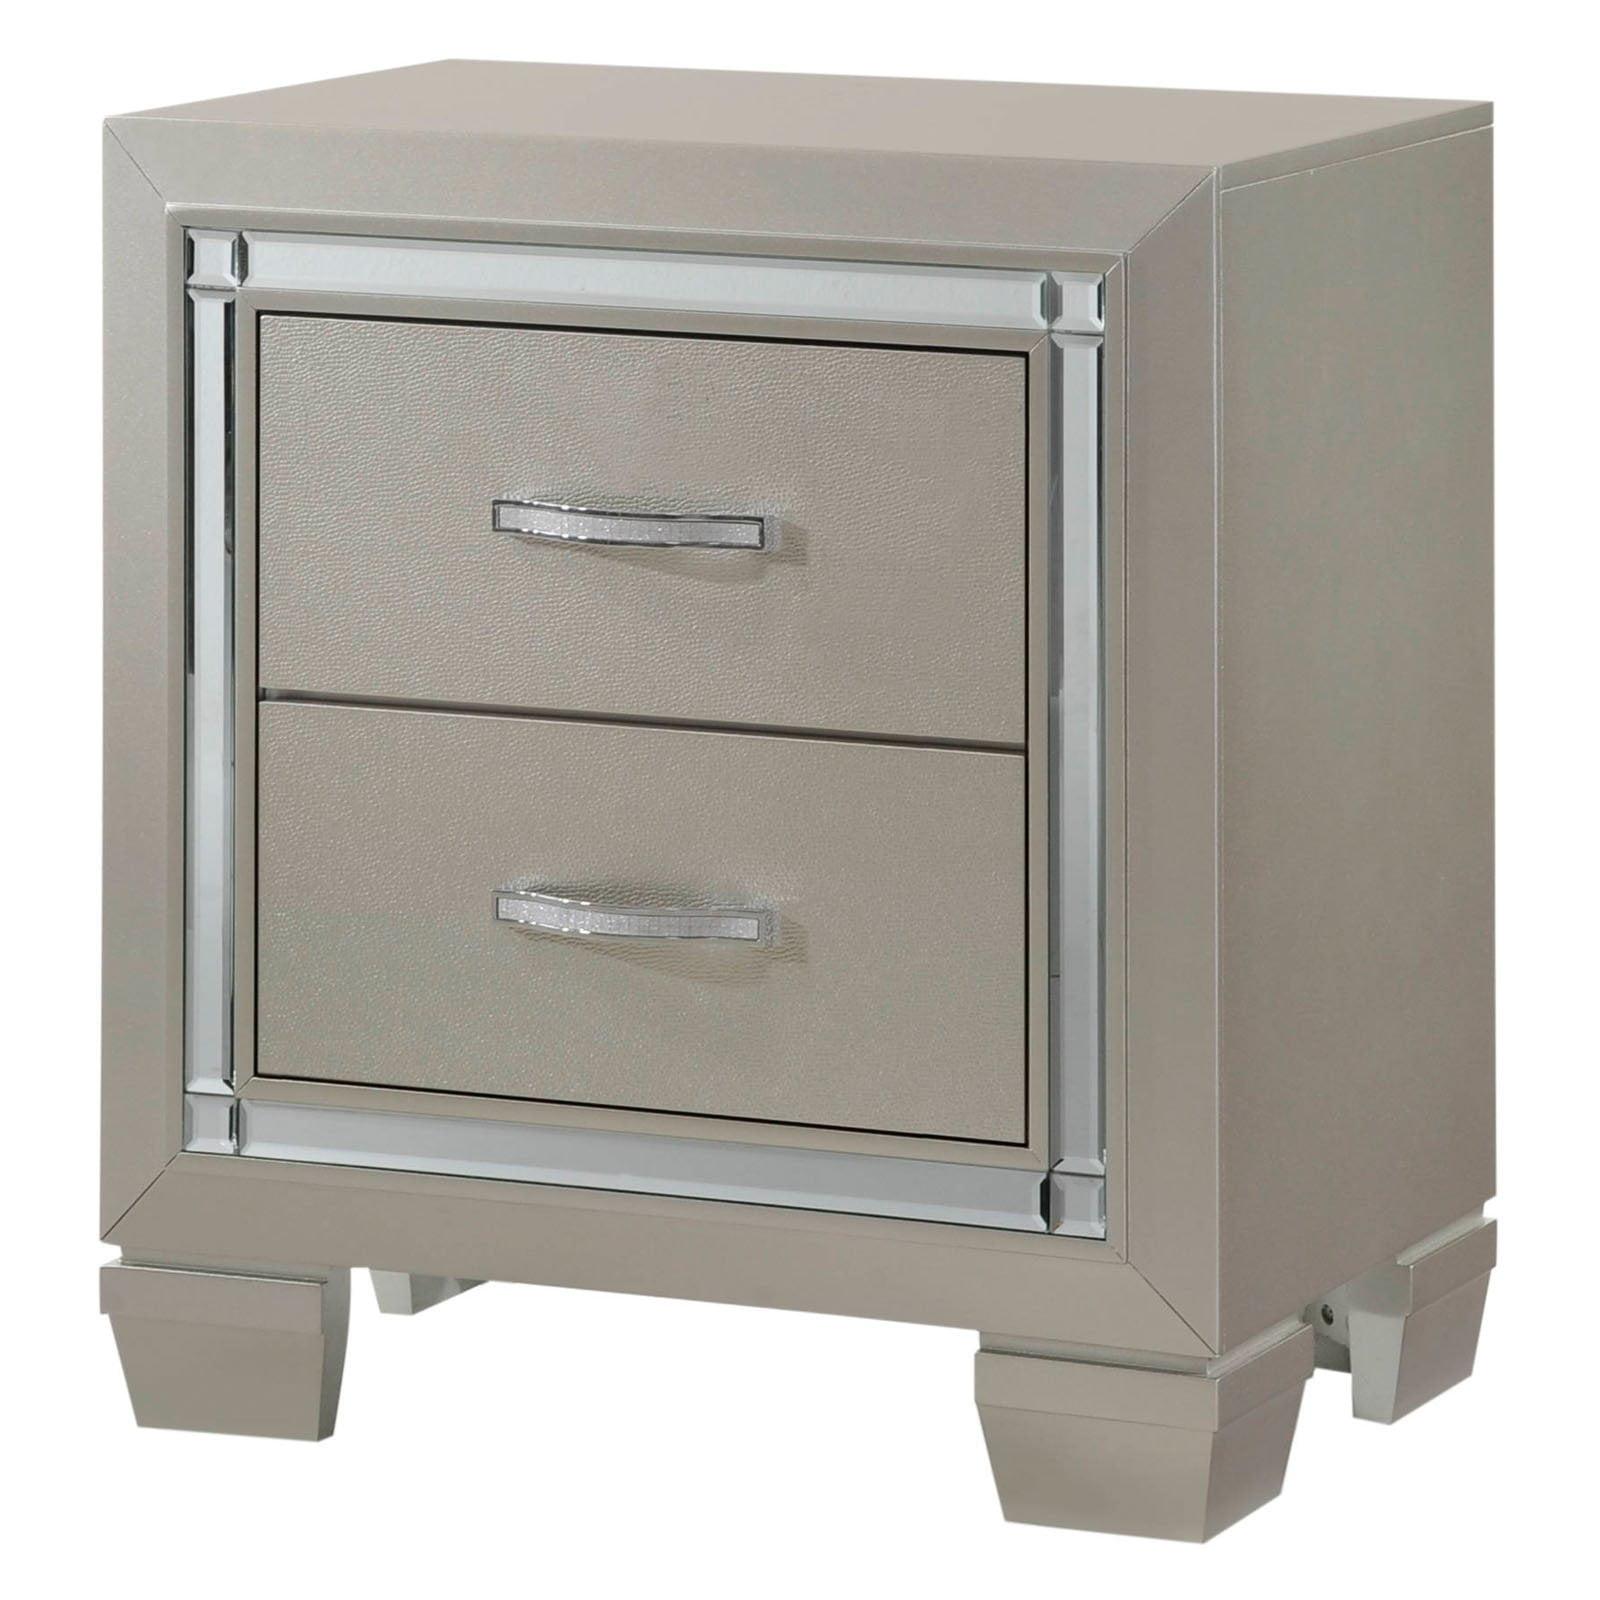 Chic Glam 2-Drawer Nightstand in Gray with Mirror Glass Trim